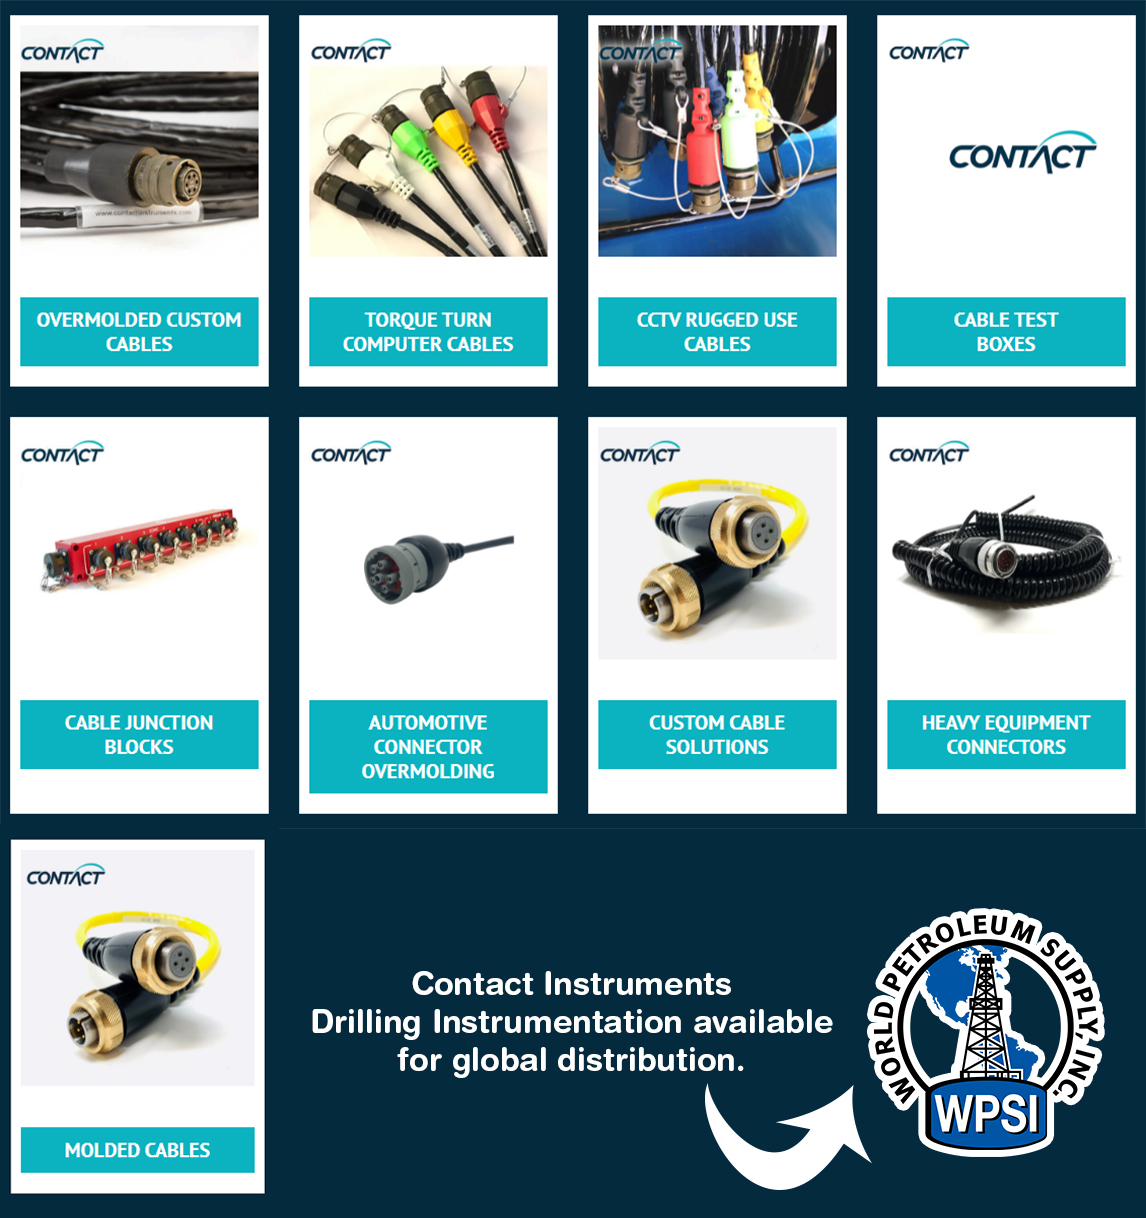 Custom Cables include molded custom cables, torque-turn computer cables, CCTV rugged use cables, as well as cable test boxes and junction blocks available at World Petroleum Supply.